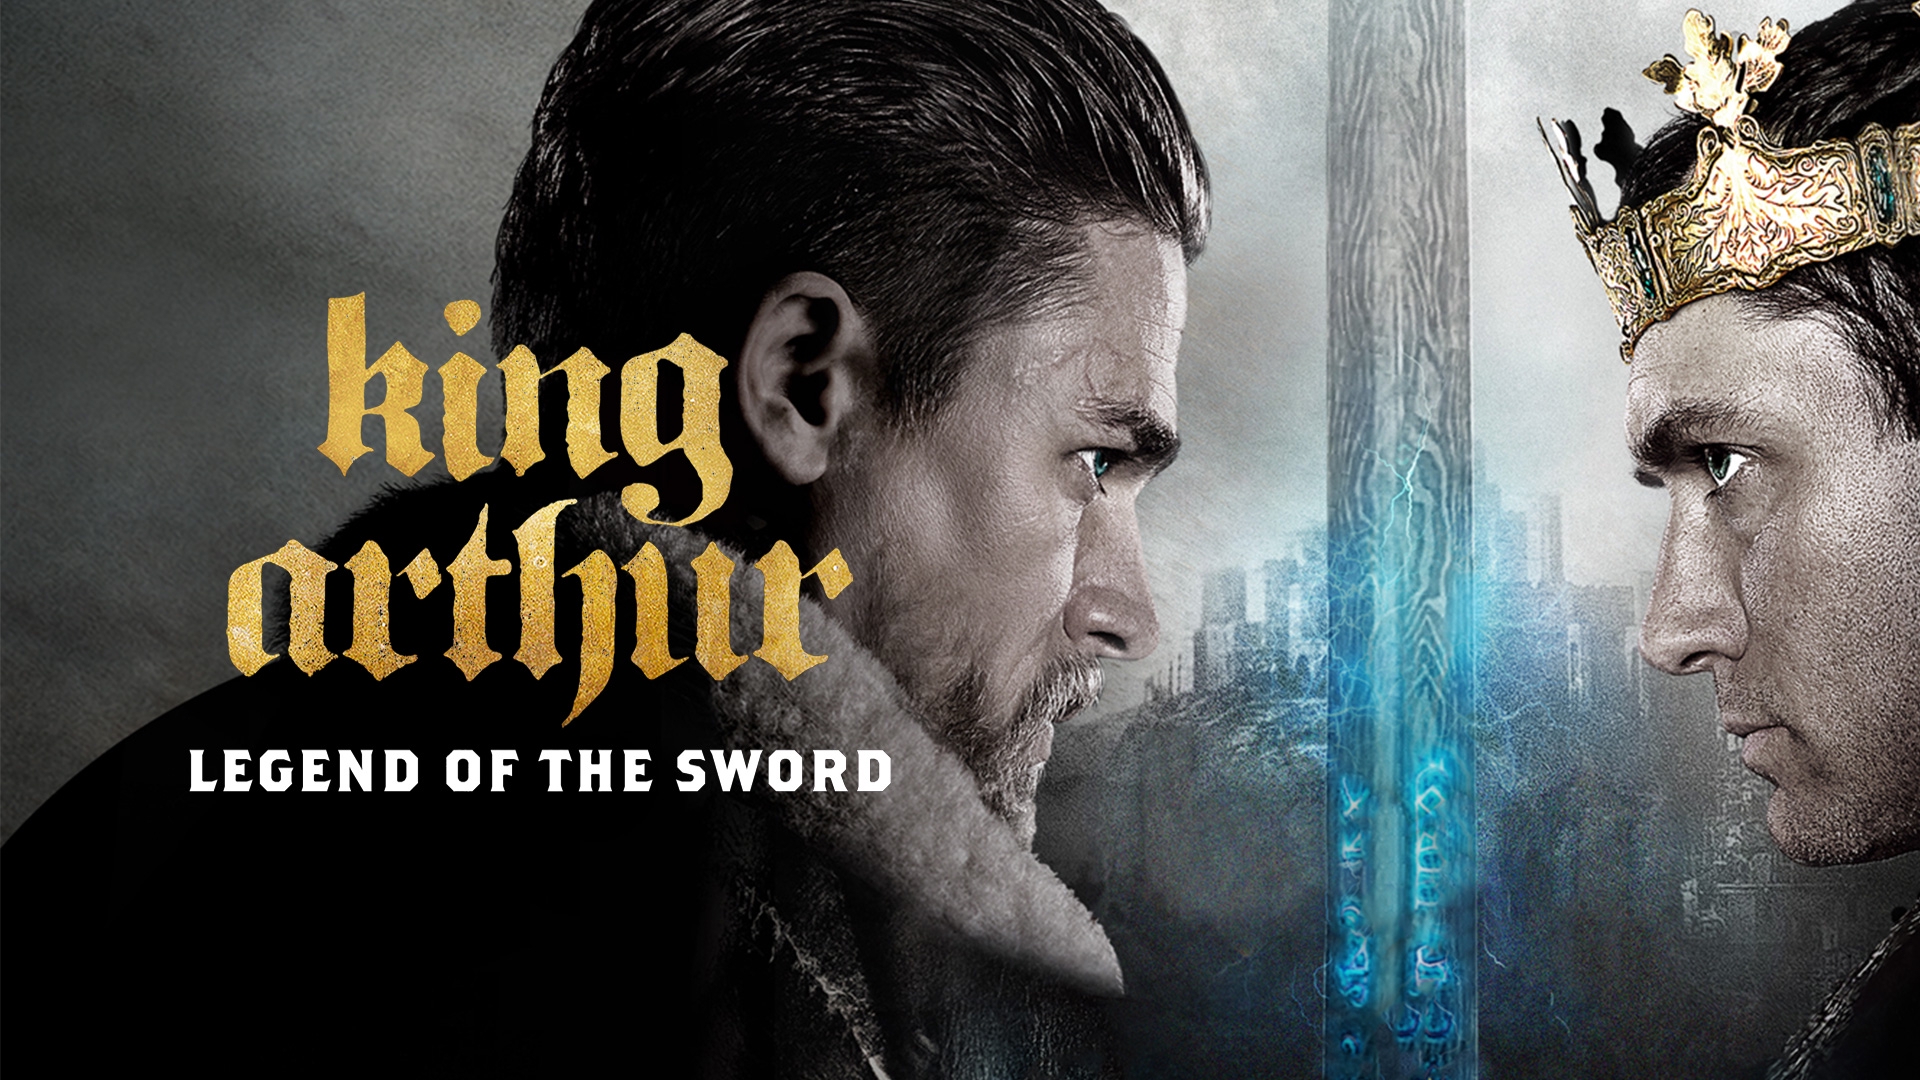 Stream King Arthur: Legend of The Sword Online Download and Watch HD.